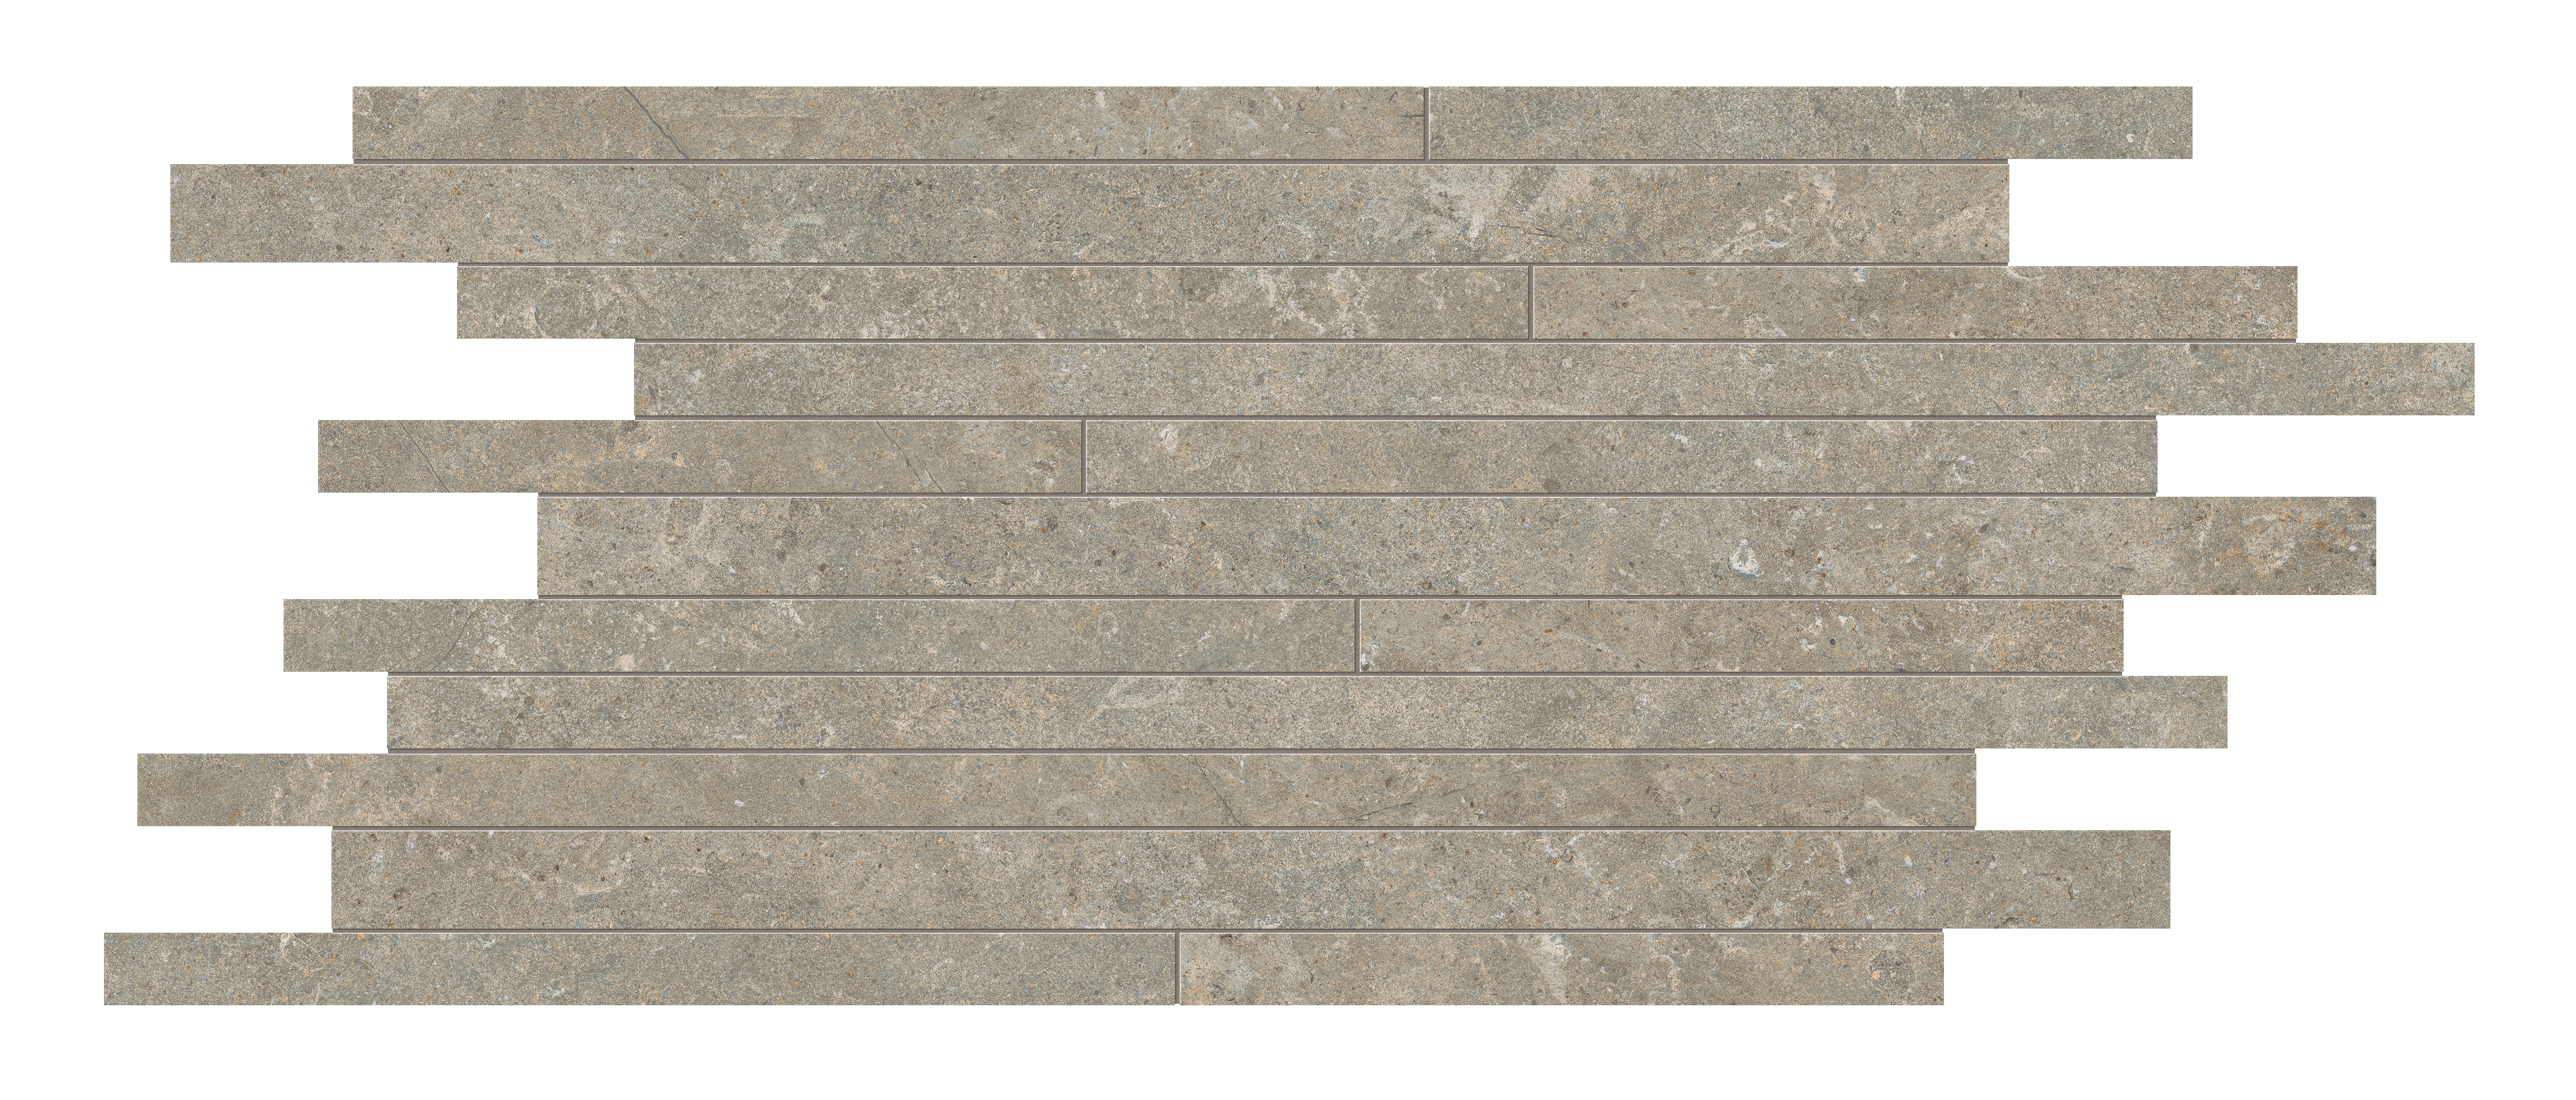 Marca Corona Arkistyle Fossil Strutturato Hithick Line Tessere J283 strutturato hithick 30x60cm rectified 9mm